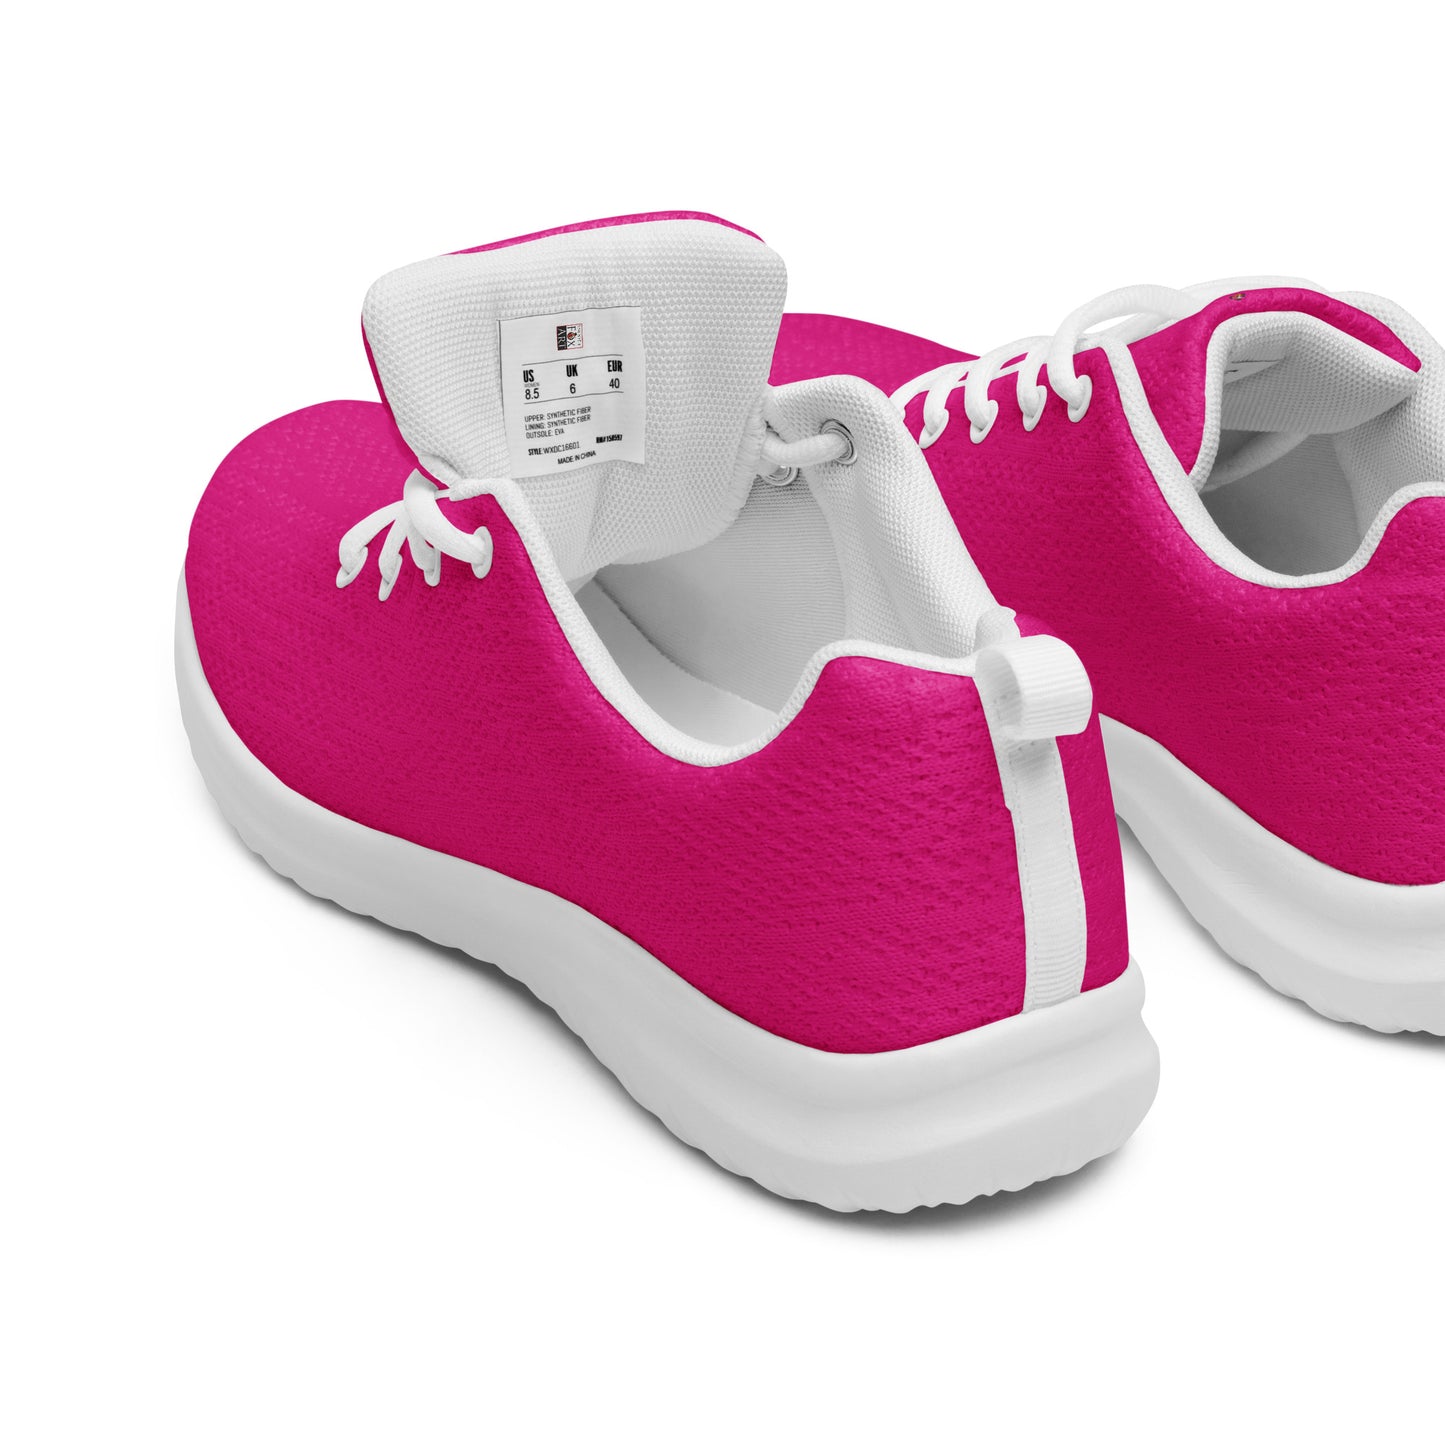 Women’s Athletic Shoes - Mexico Pink